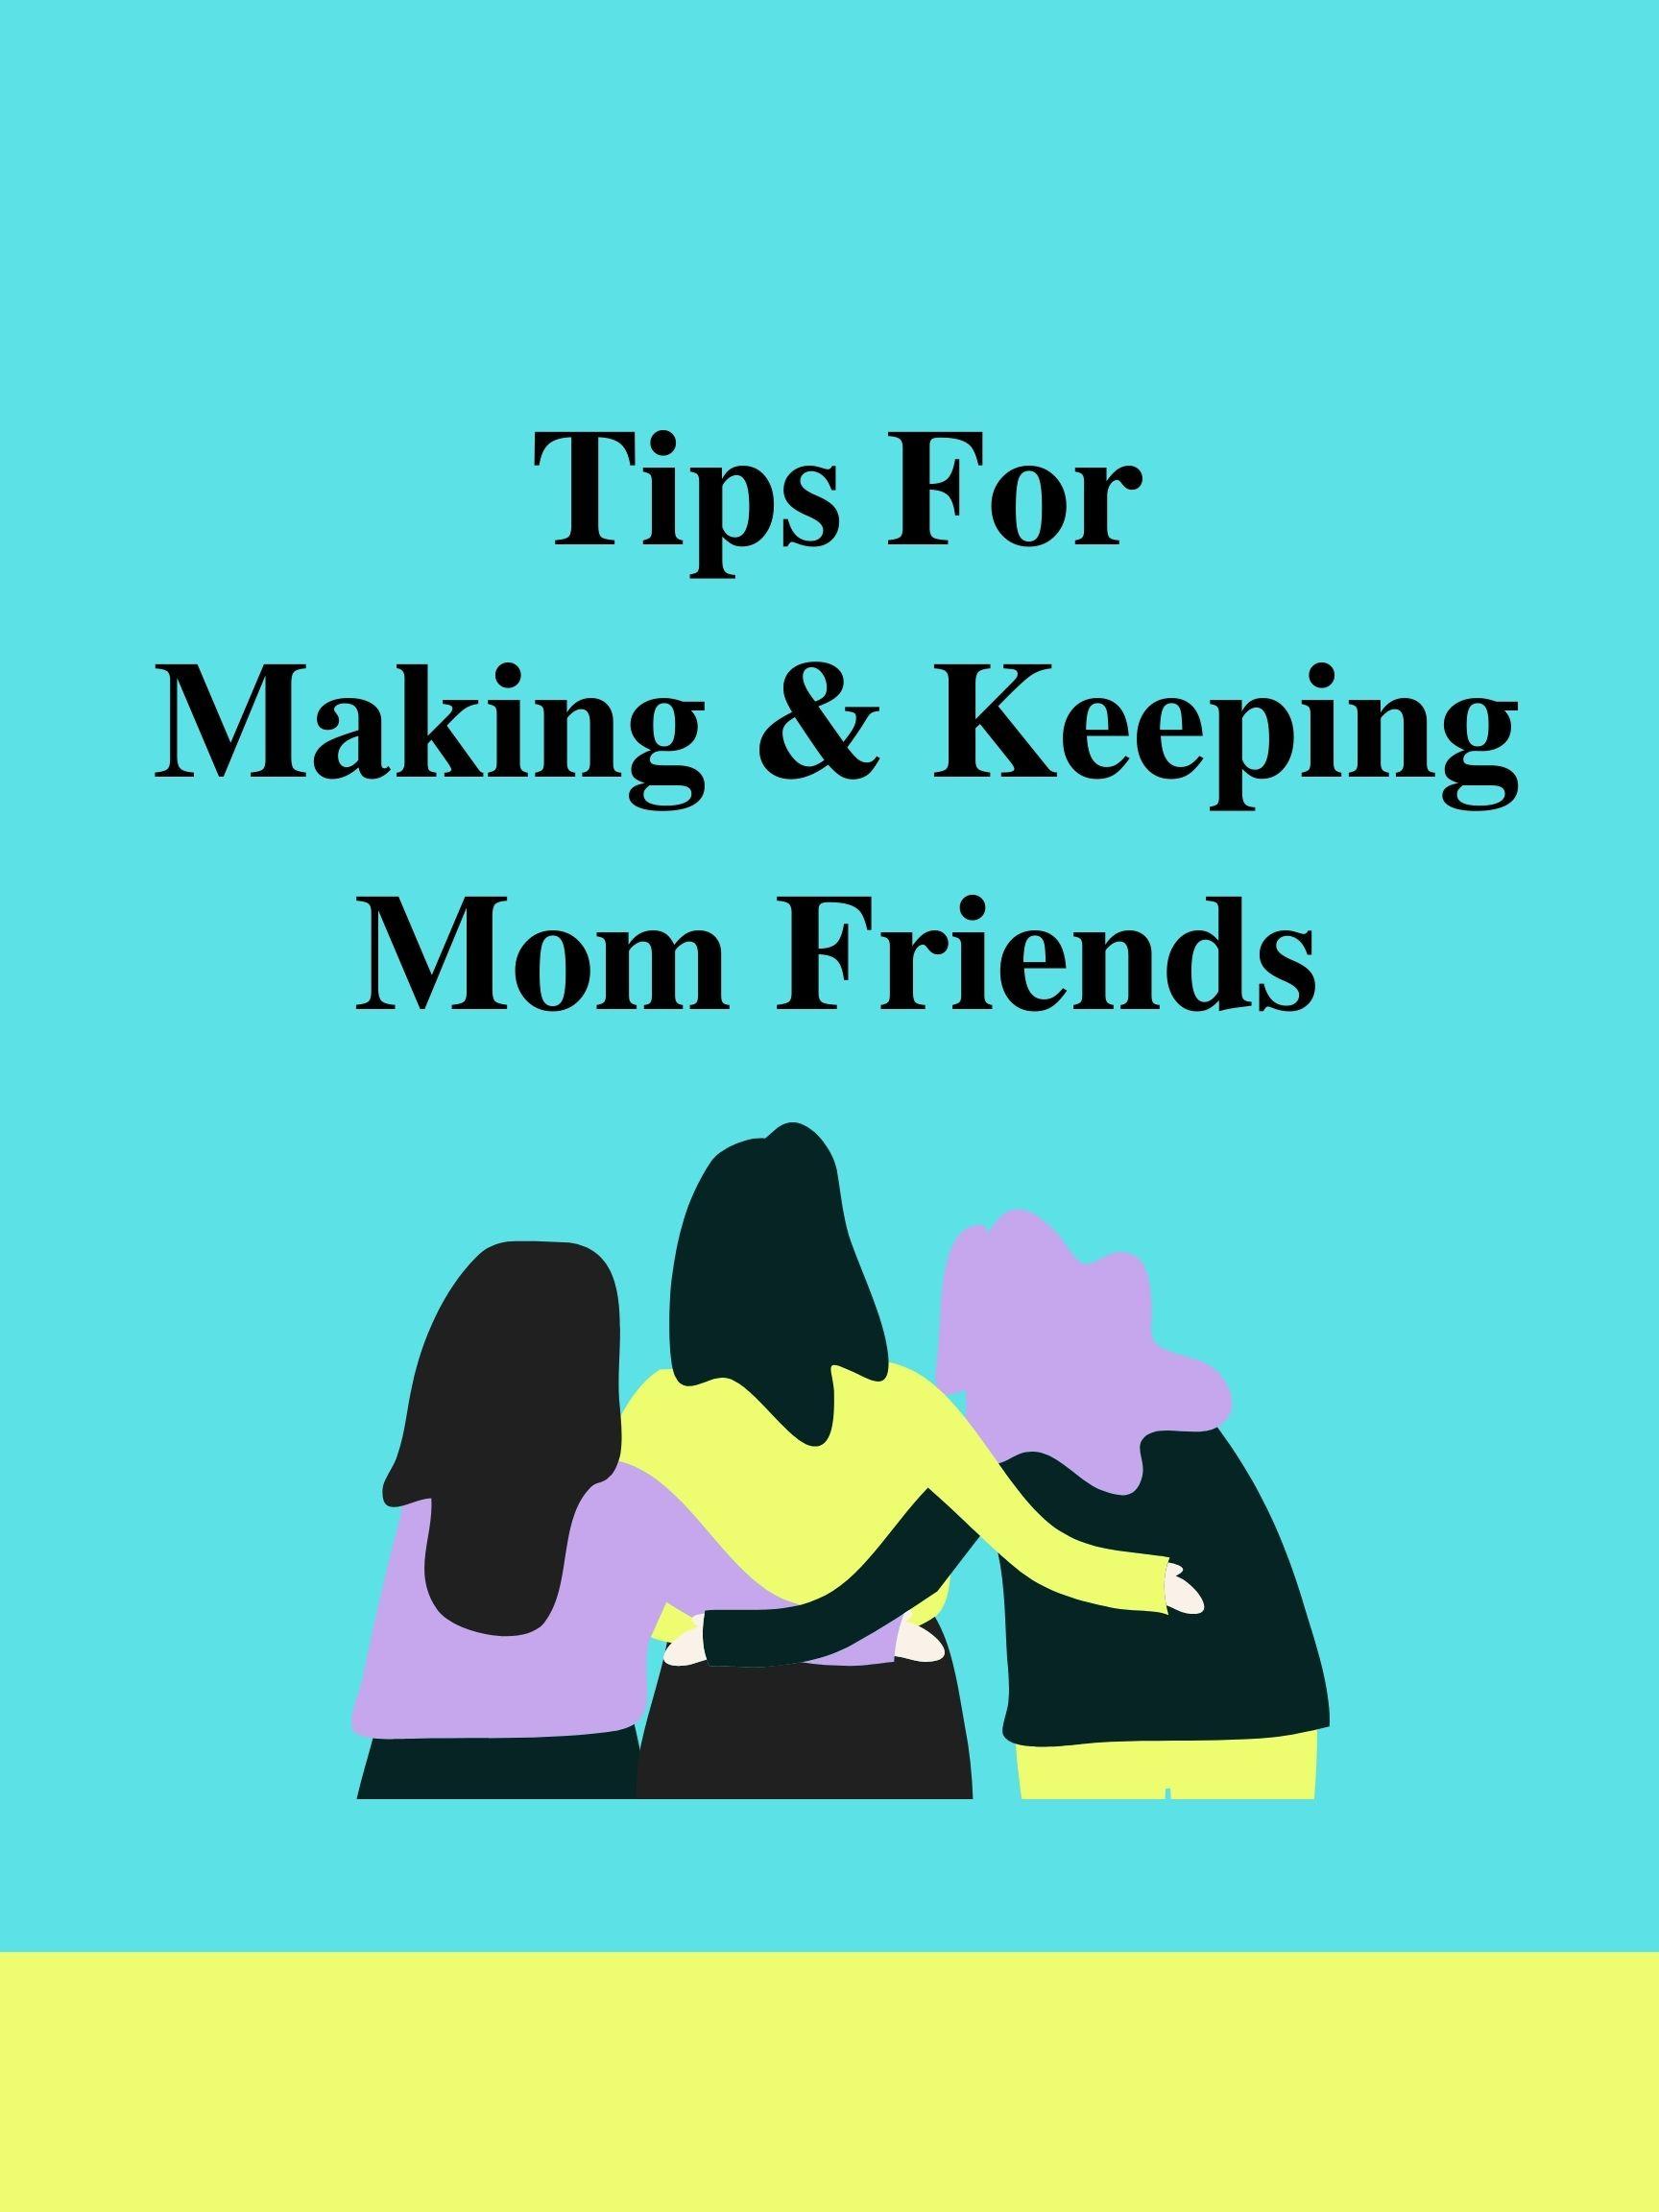 6 Simple Secrets to Easily Making & Keeping Mom Friends